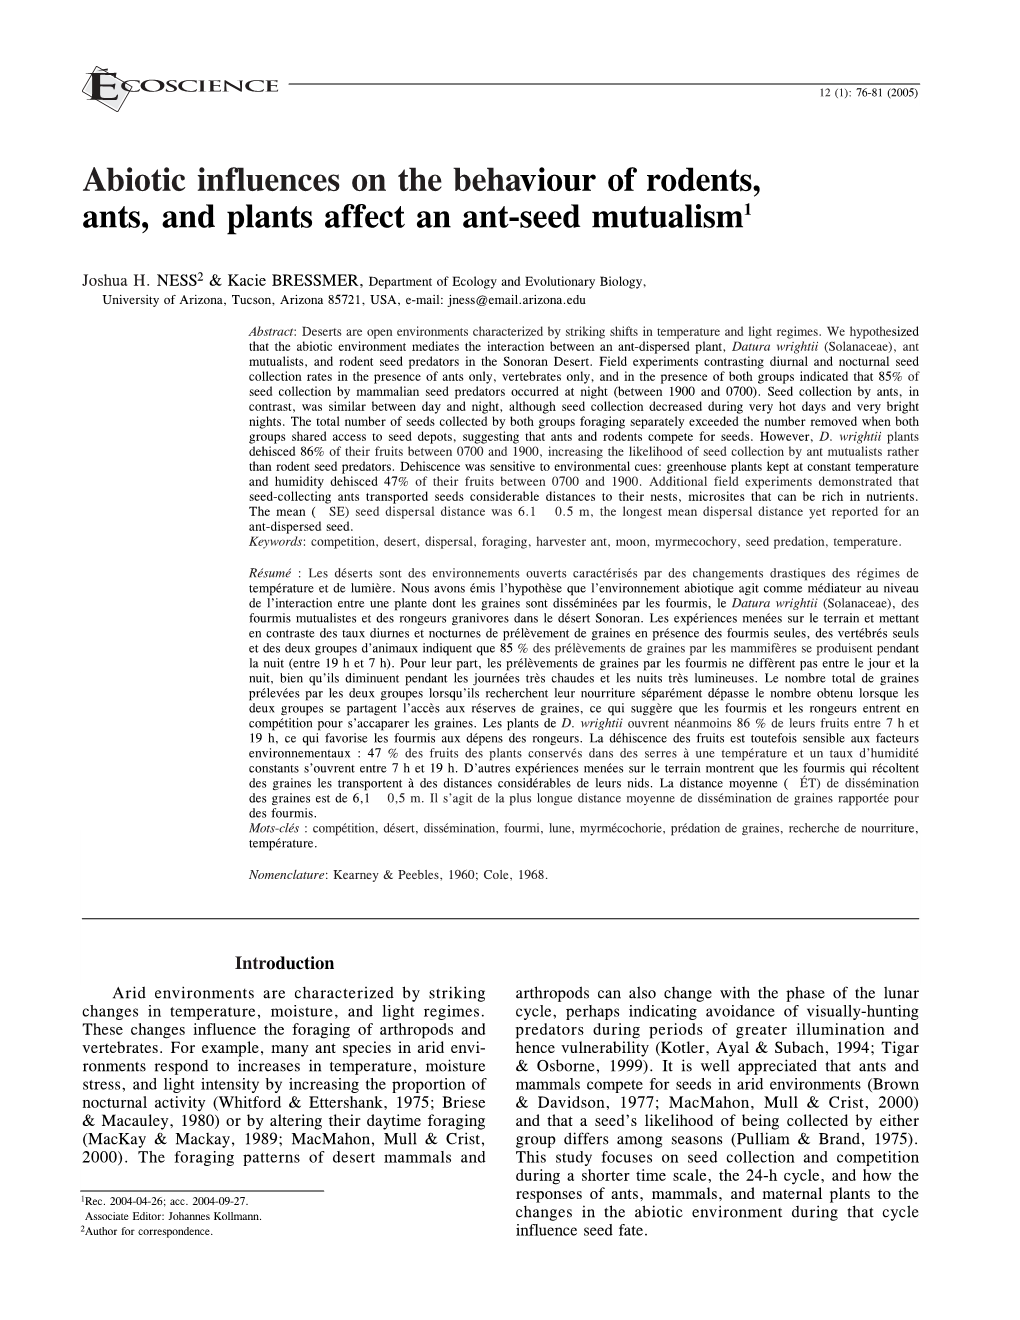 Abiotic Influences on the Behaviour of Rodents, Ants, and Plants Affect an Ant-Seed Mutualism1